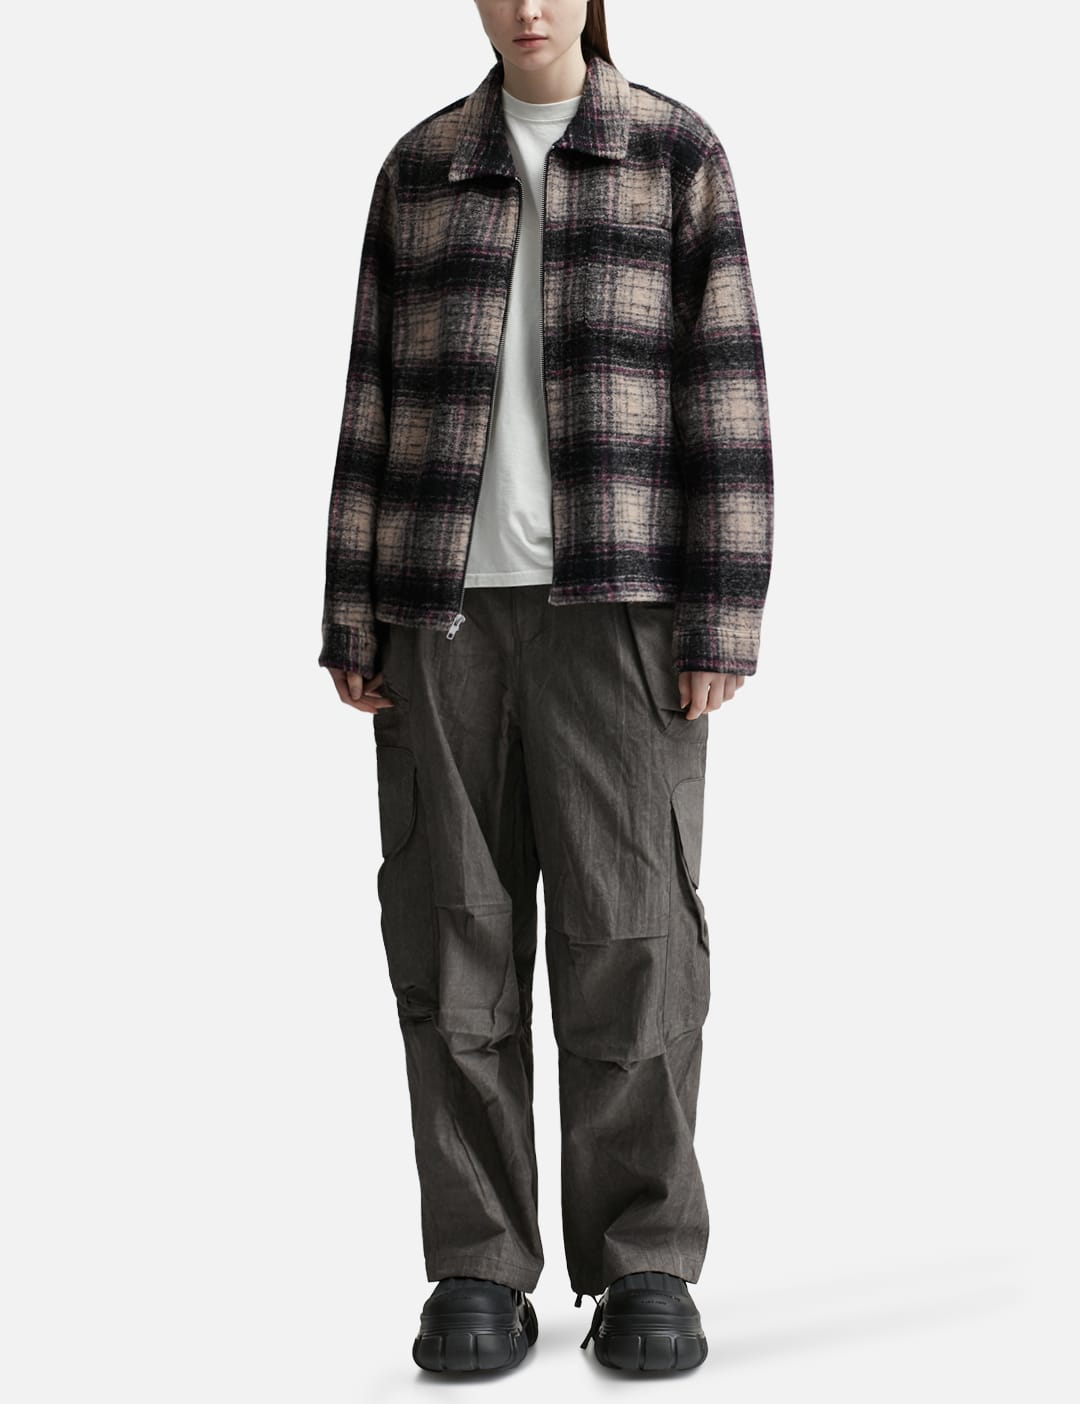 Stüssy - Wool Plaid Zip Shirt | HBX - Globally Curated Fashion and